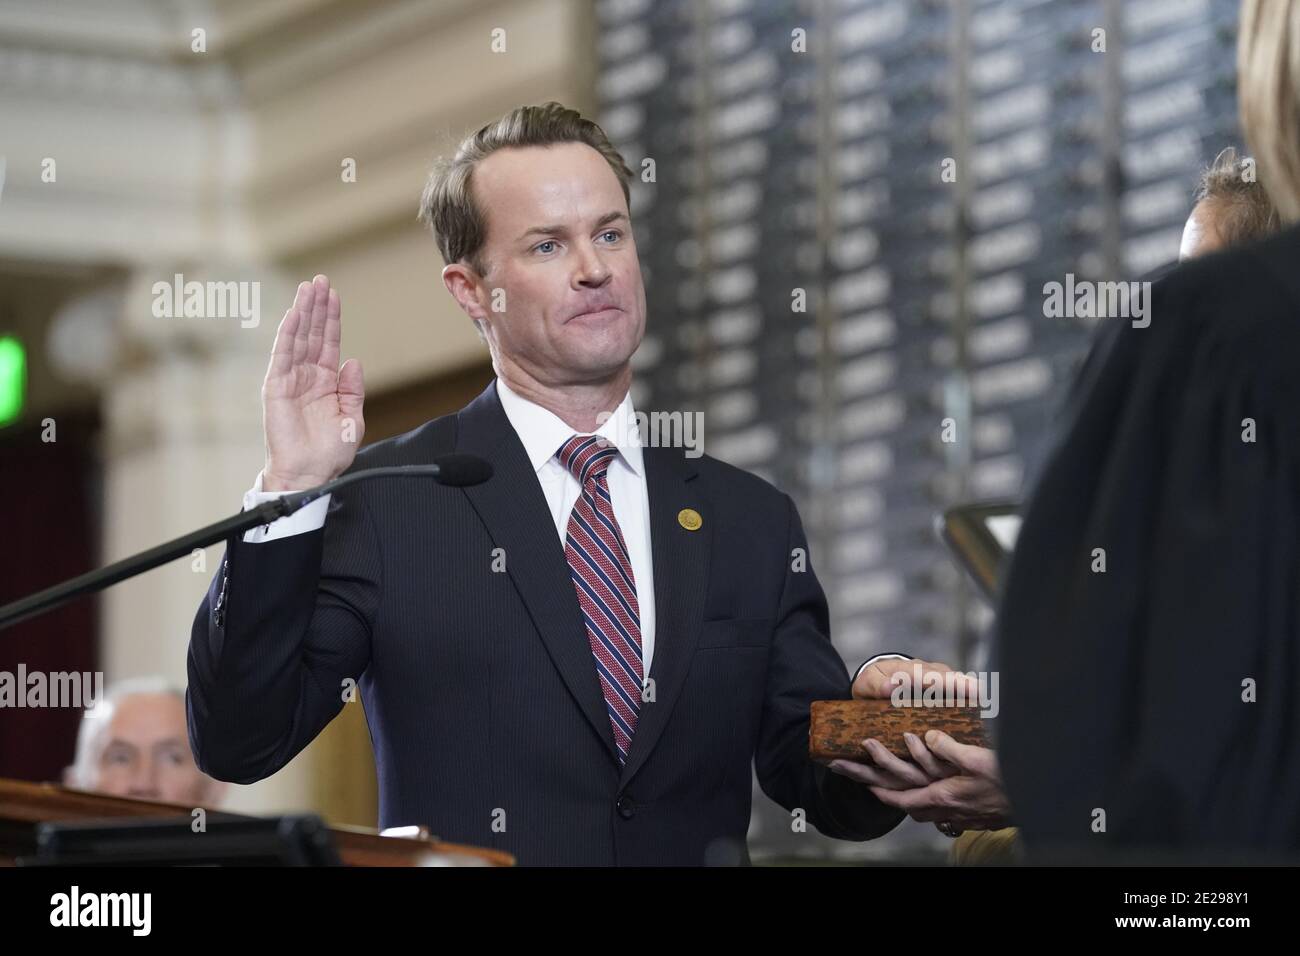 Austin, Texas January 12, 2021: State Rep. DADE PHELAN (R-Beaumont) is sworn in as Speaker of the Texas House during the opening of the 87th Session of the Texas Legislature. Lawmakers are facing a huge deficit due to the coronavirus pandemic. Credit: Bob Daemmrich/Alamy Live News Stock Photo